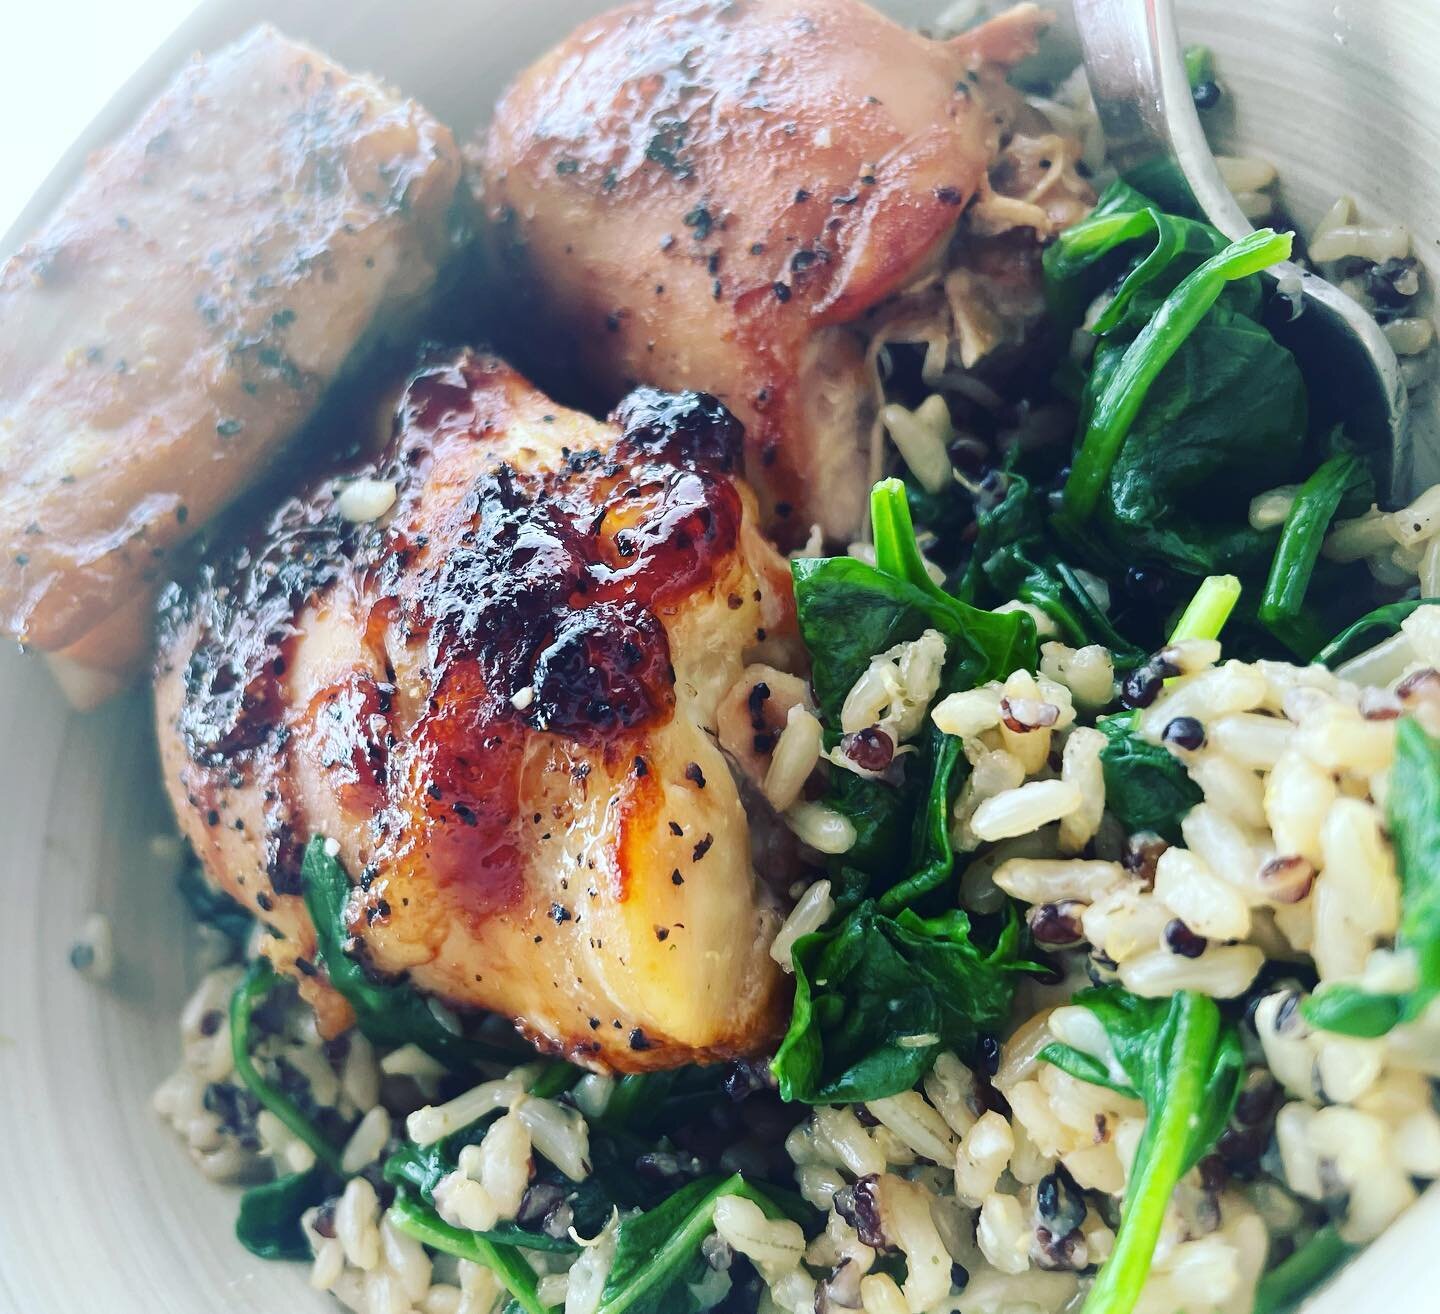 BBQ Chicken Thighs, Garlic Saut&eacute;ed Spinach and Quinoa+Wild Rice Medley 🔥🔥🔥 #healthy #hearty #recipe #protein #carbs #nutrientdense #nutrition #missionfit #stayready